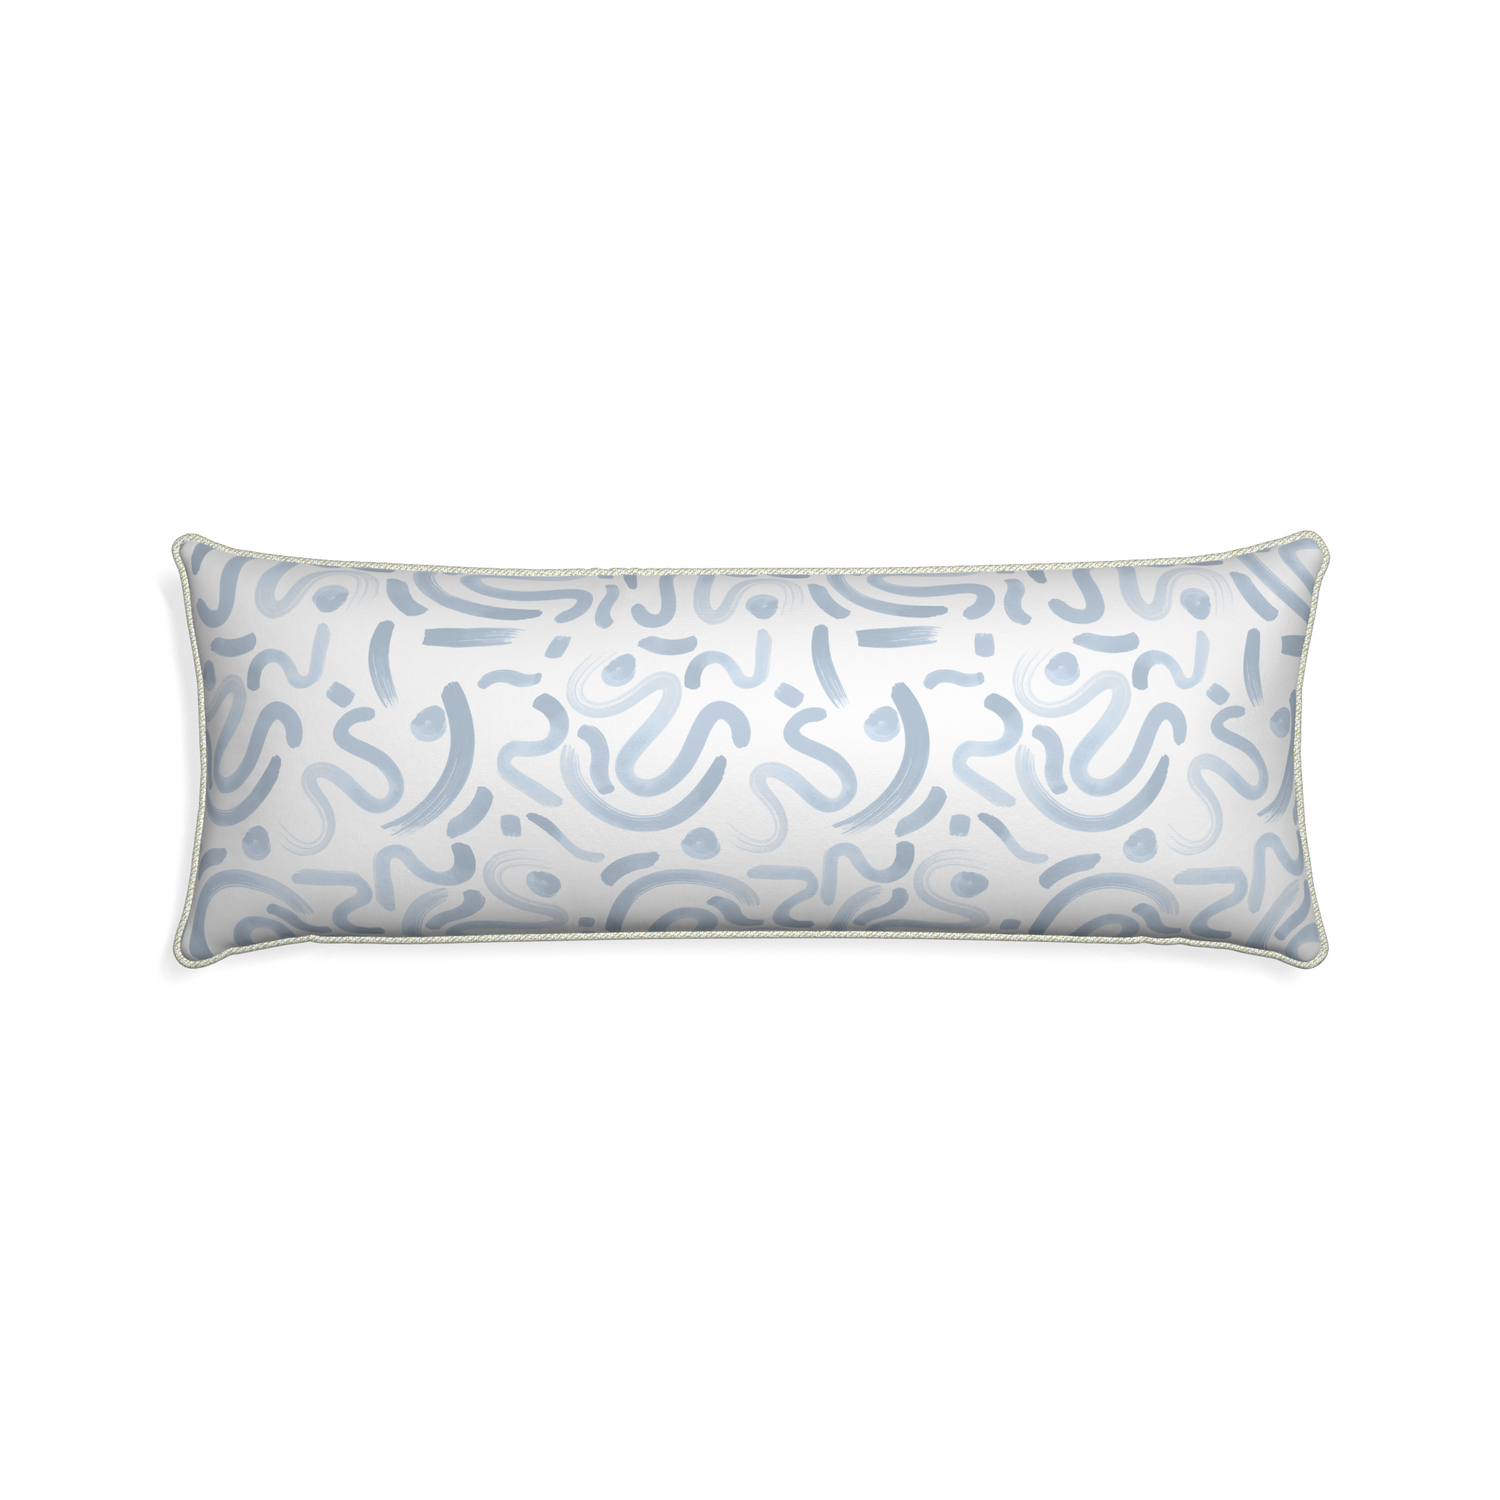 Xl-lumbar hockney sky custom pillow with l piping on white background